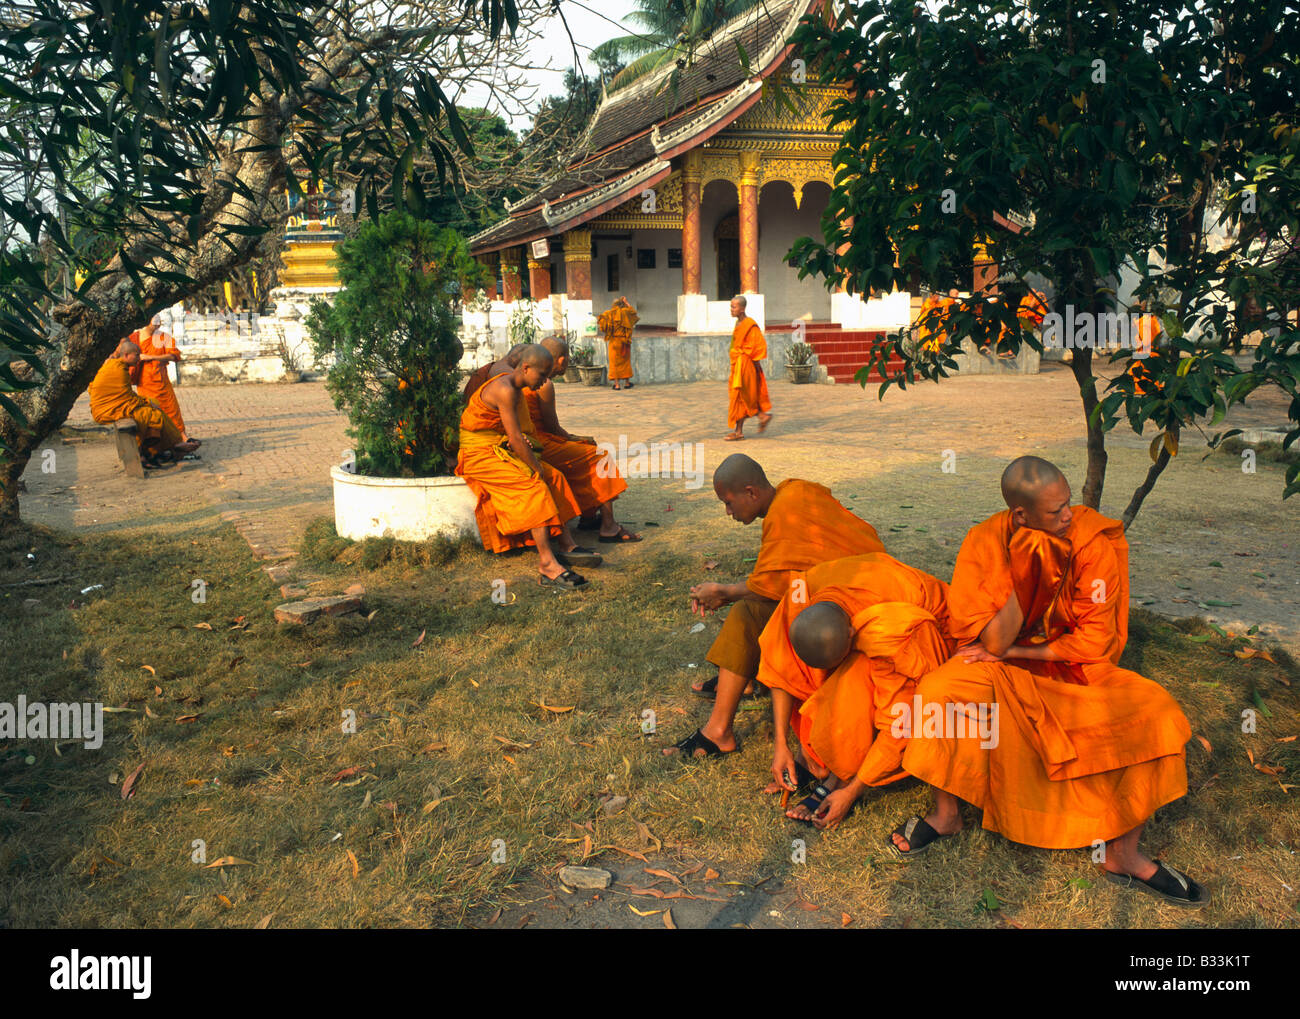 Laos Luang Prabang Wat Saen Group of monks resting outside a temple after the morning prayer Stock Photo